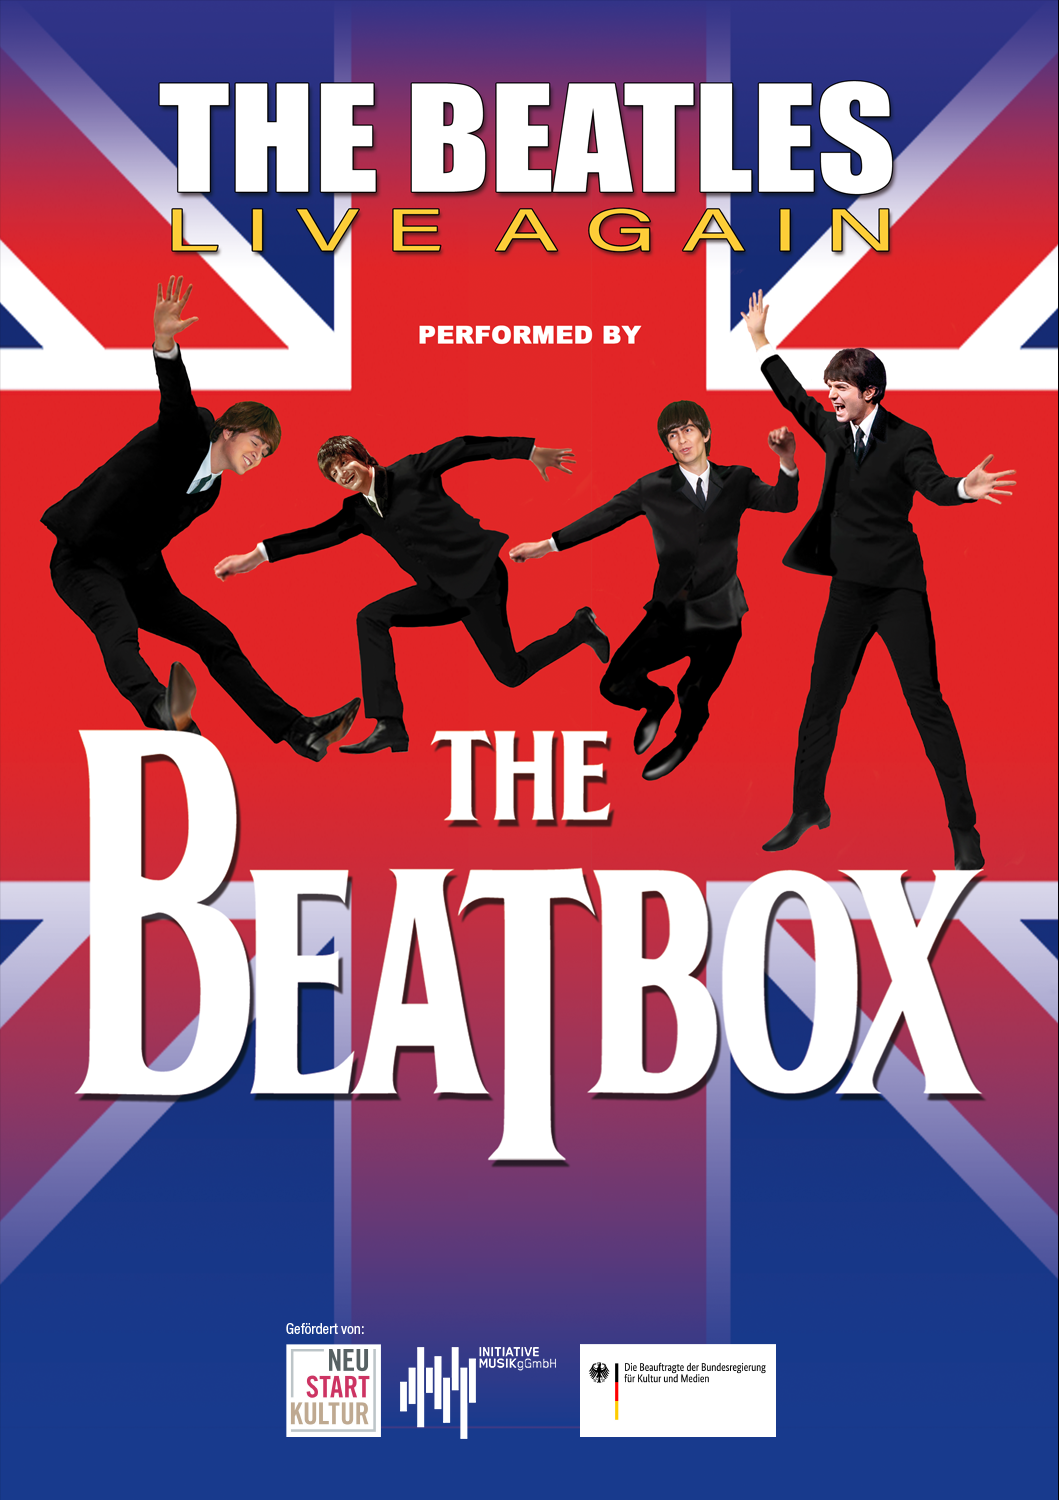 The Beatles Live Again in Hoyerswerda performed by THE BEATBOX